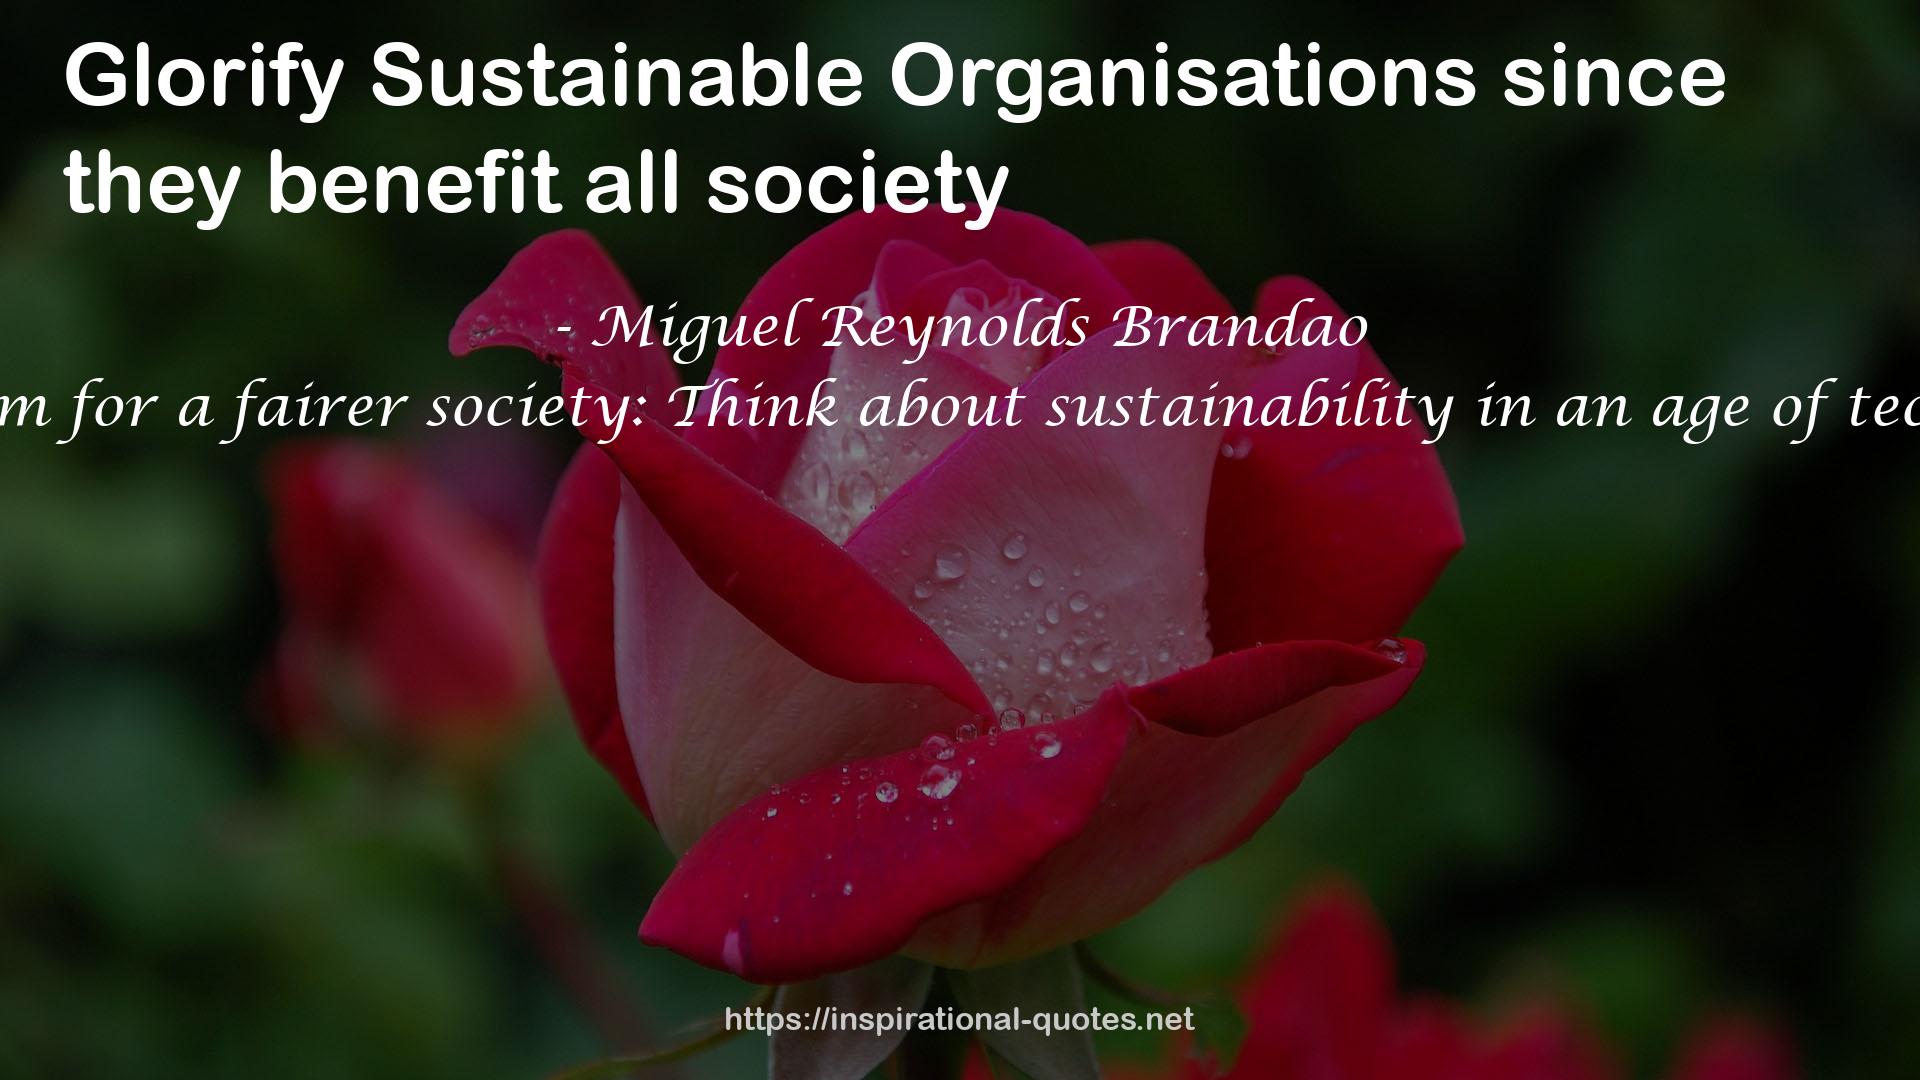 The Sustainable Organisation - a paradigm for a fairer society: Think about sustainability in an age of technological progress and rising inequality QUOTES